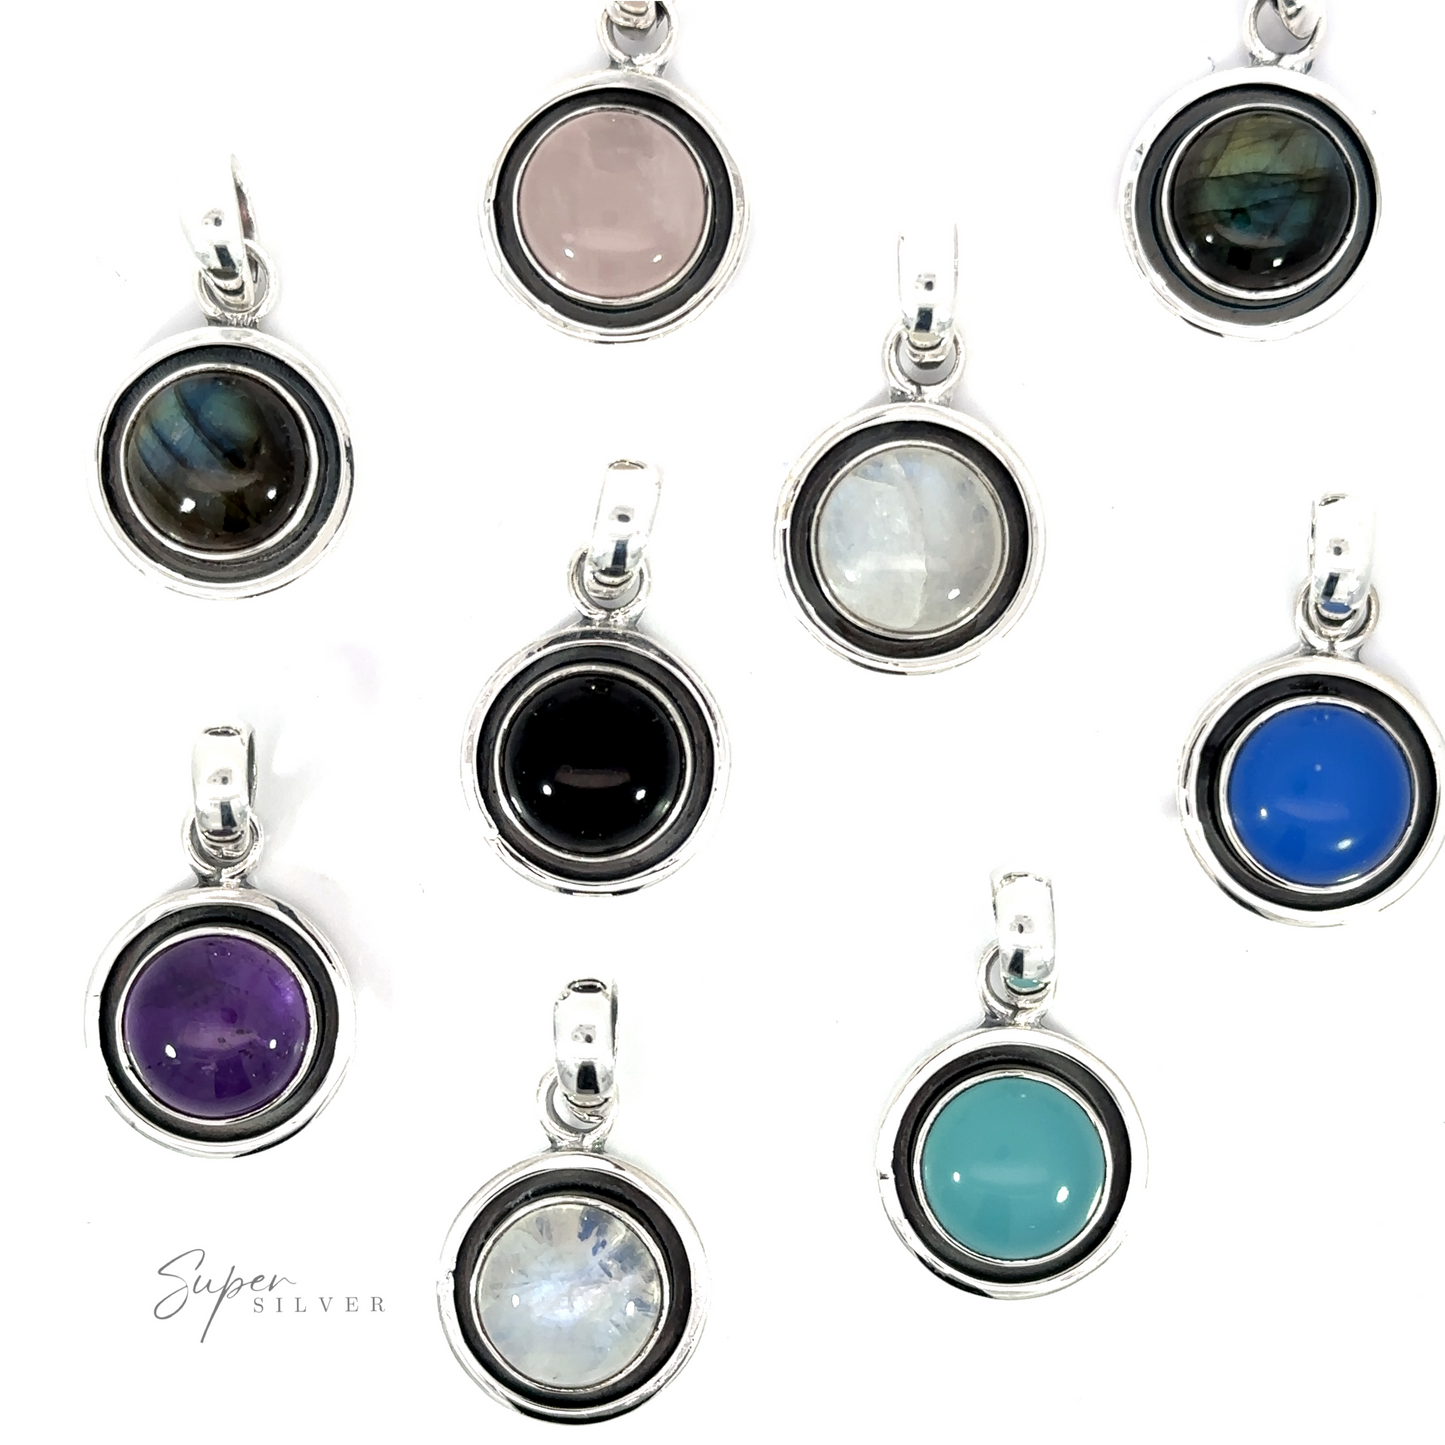 A variety of Minimalist Round Gemstone Pendants with a contemporary flair, set against a white background.